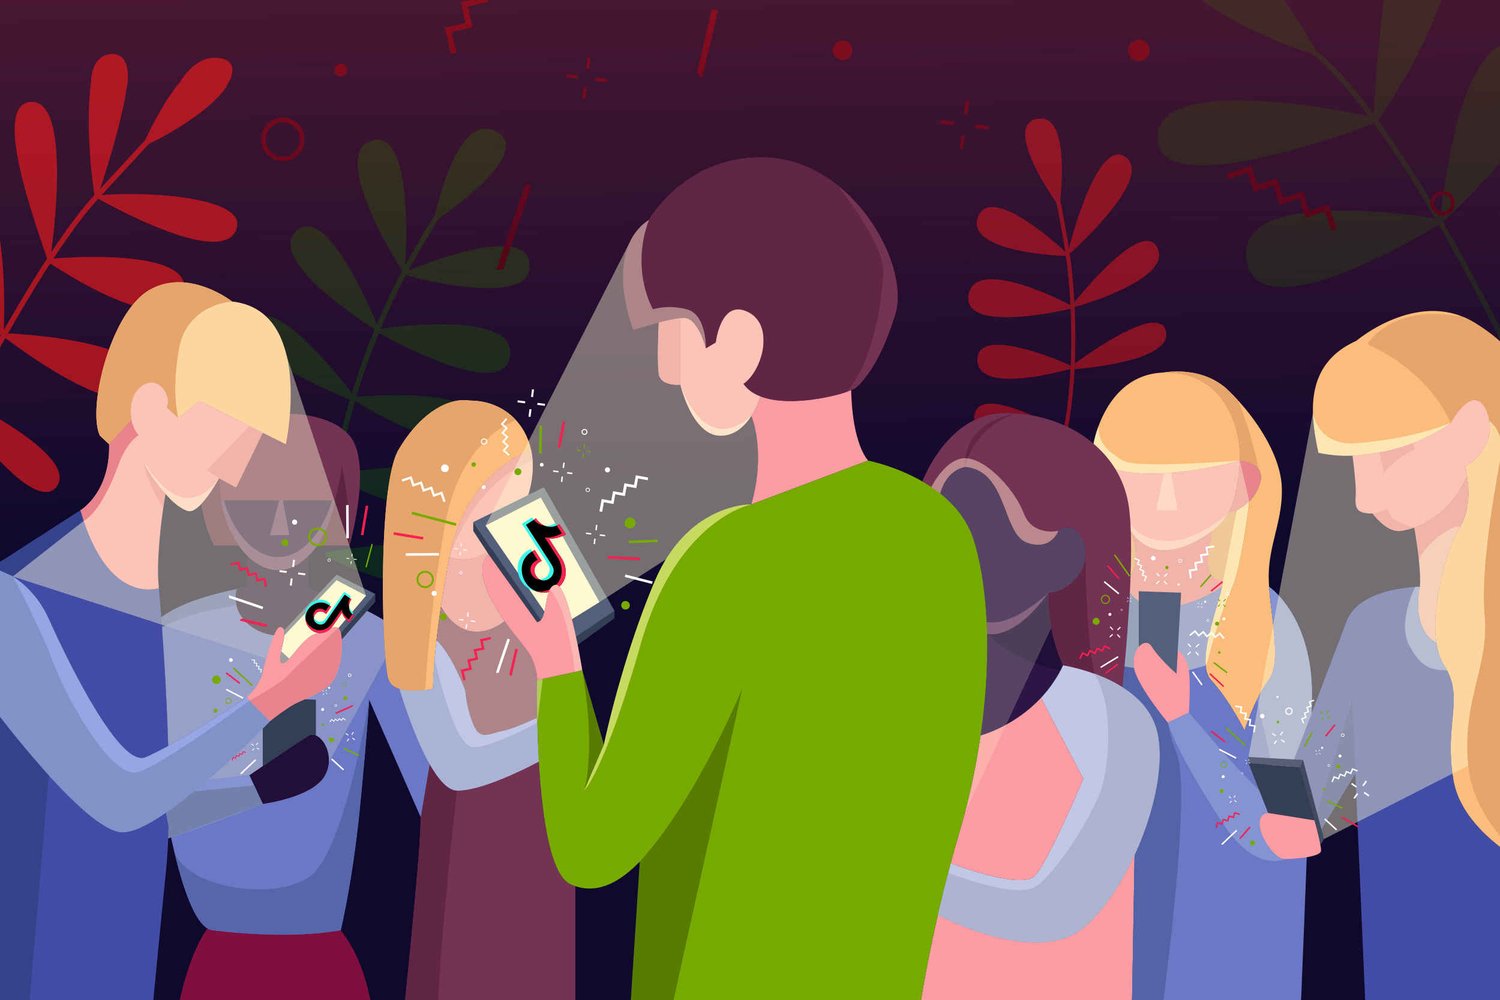 Illustration of a group of people looking at their mobile phones with a TikTok logo on them.